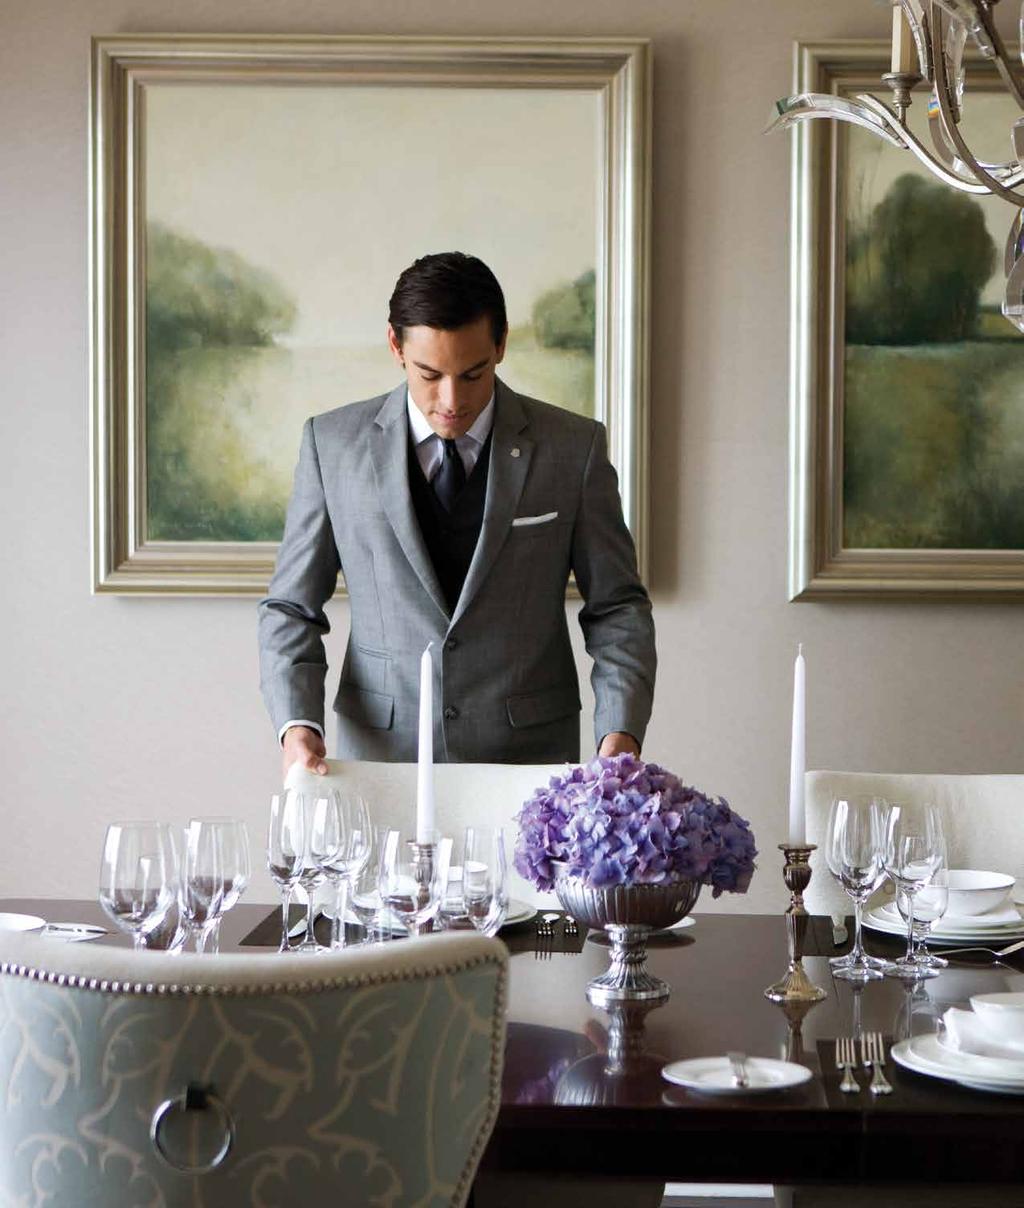 THE LEGENDARY BUTLER SERVICE A treasured hallmark of St. Regis, the signature St. Regis Butler service. Whatever your request, expect the St.